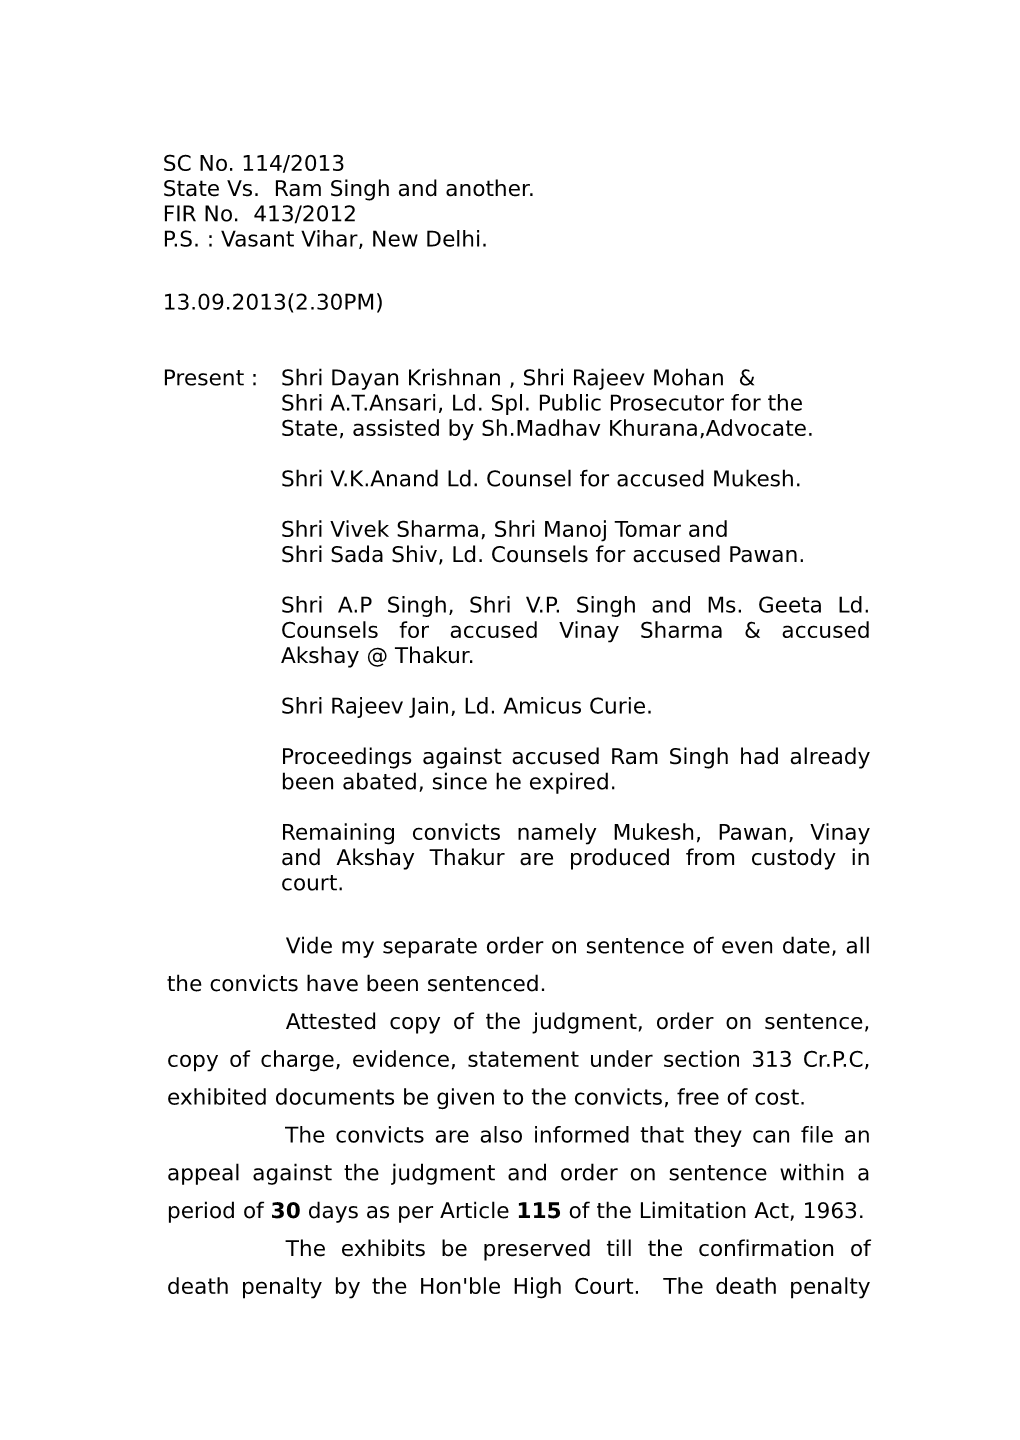 SC No. 114/2013 State Vs. Ram Singh and Another. FIR No. 413/2012 P.S